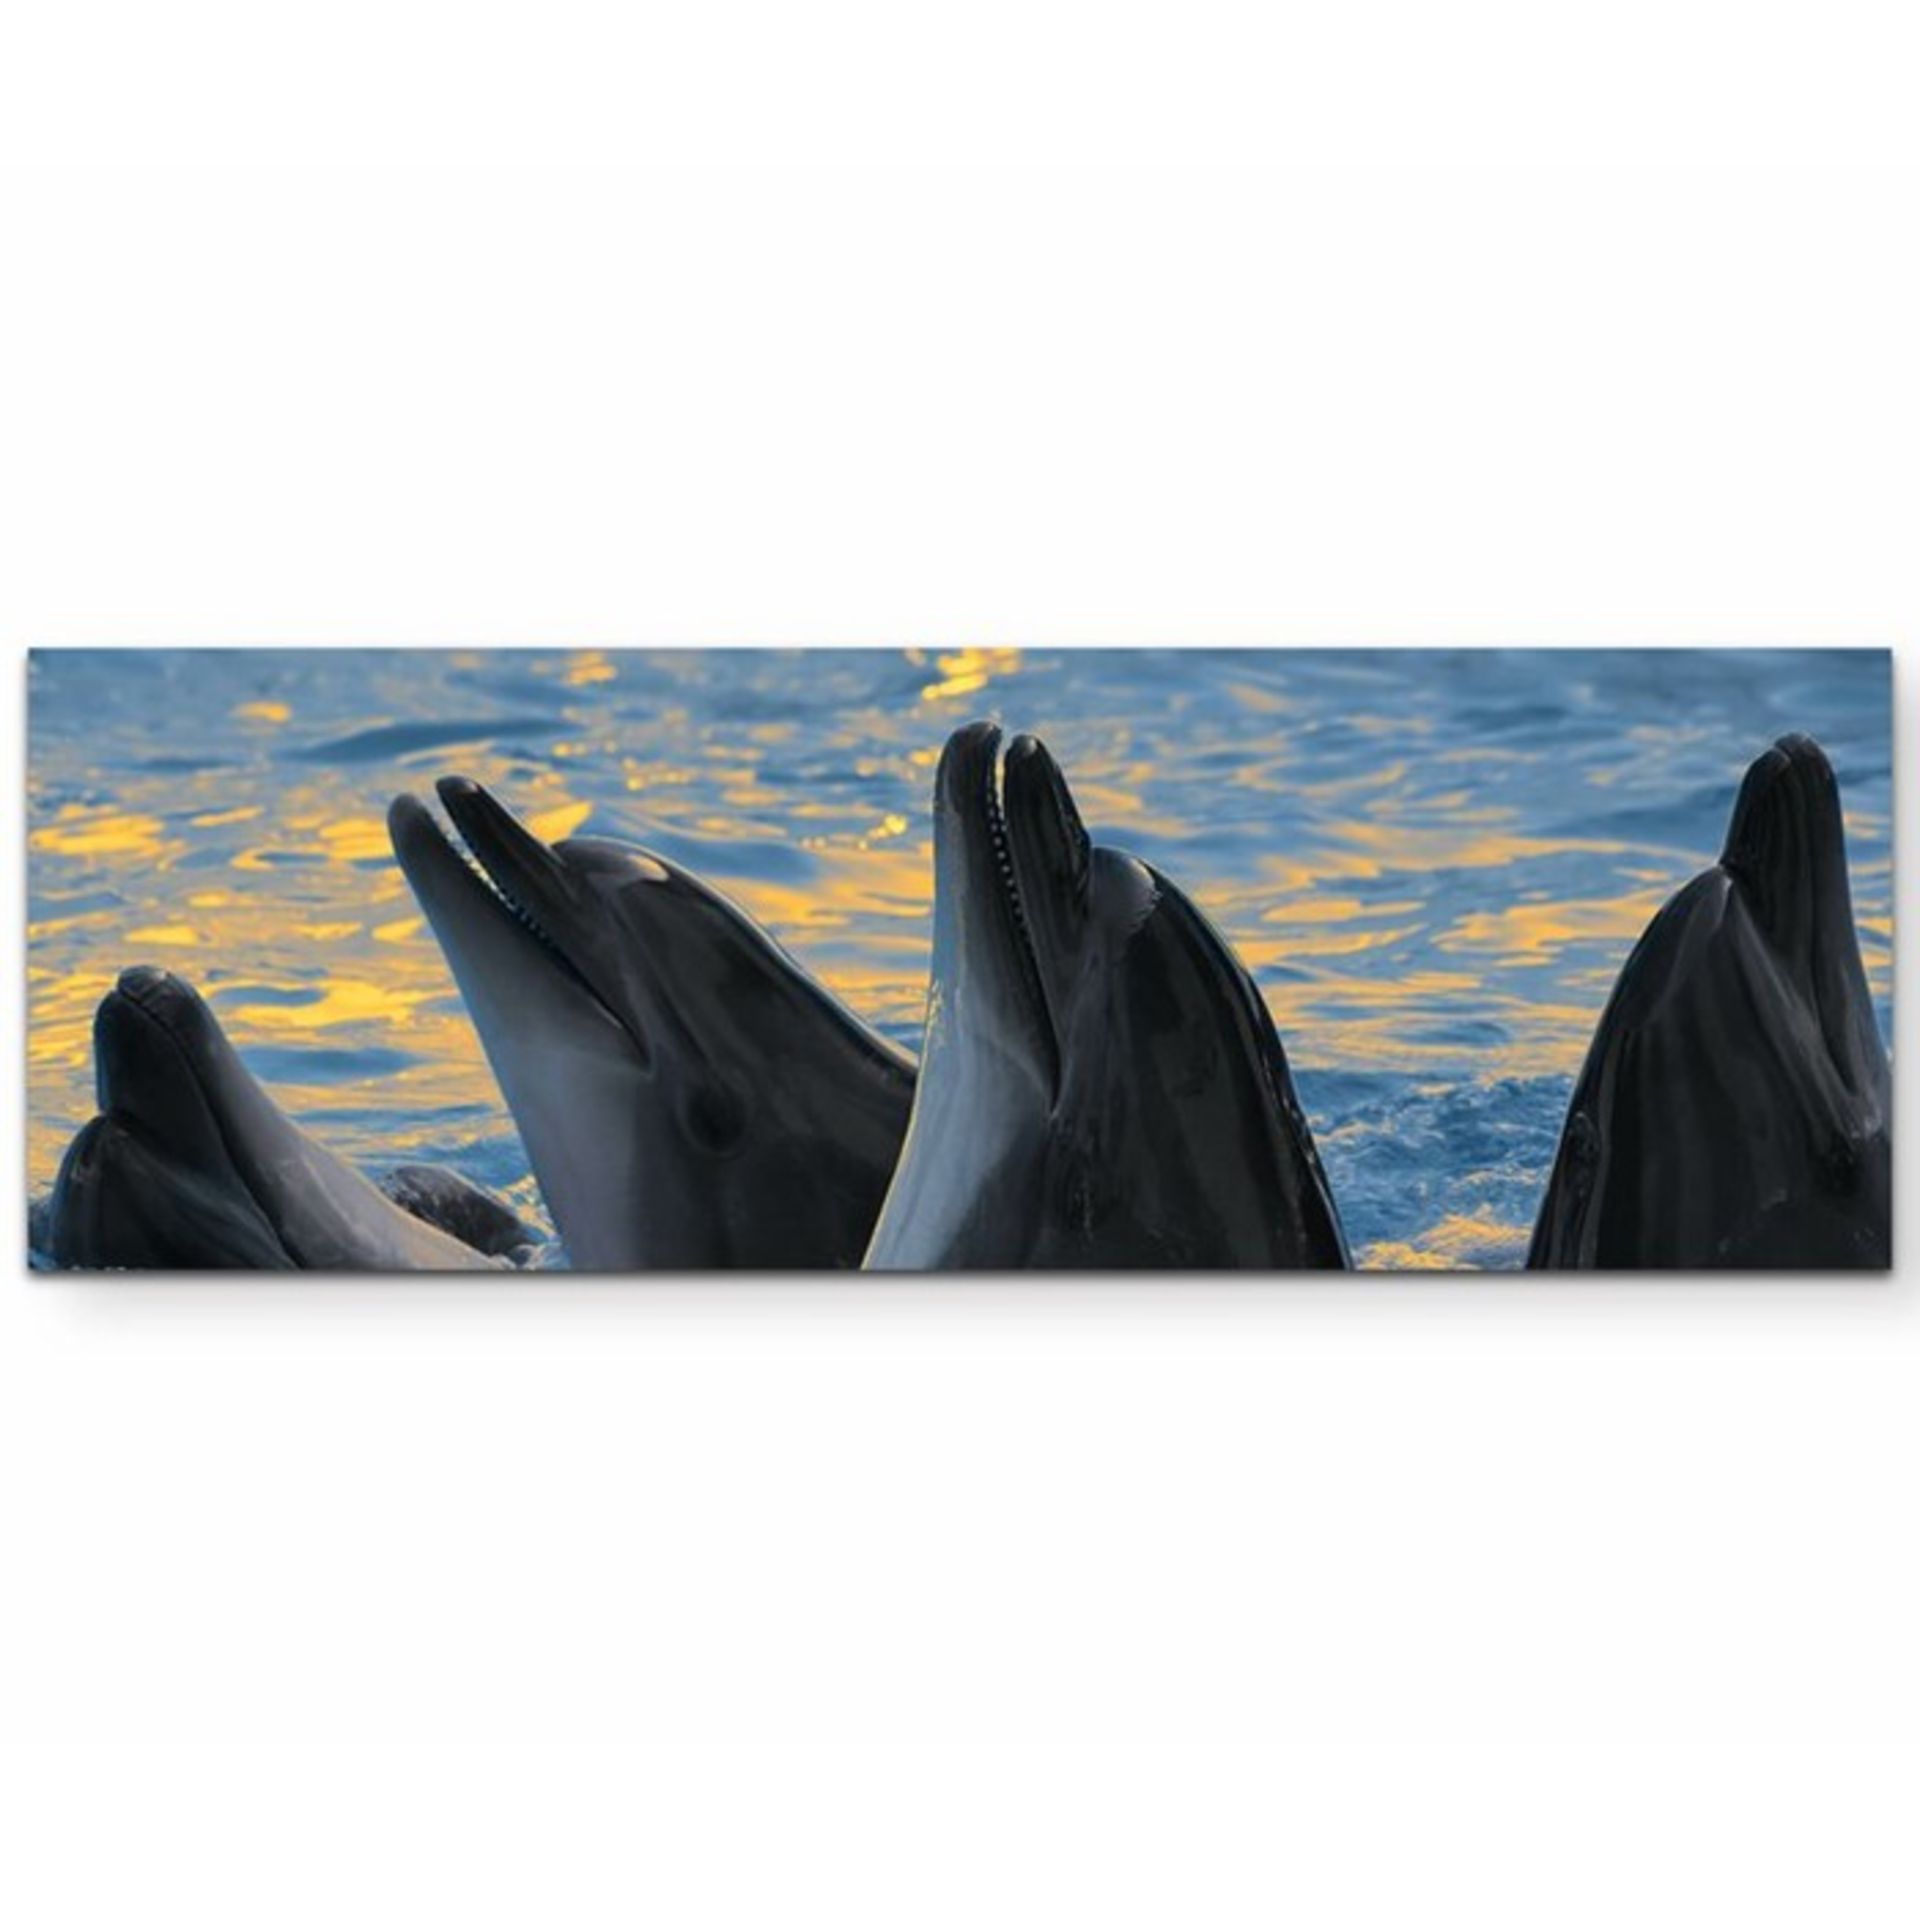 East Urban Home,Group of Dolphins at Sunset Print on Canvas RRP -£73.99 (13774/23 -EUBK0967)